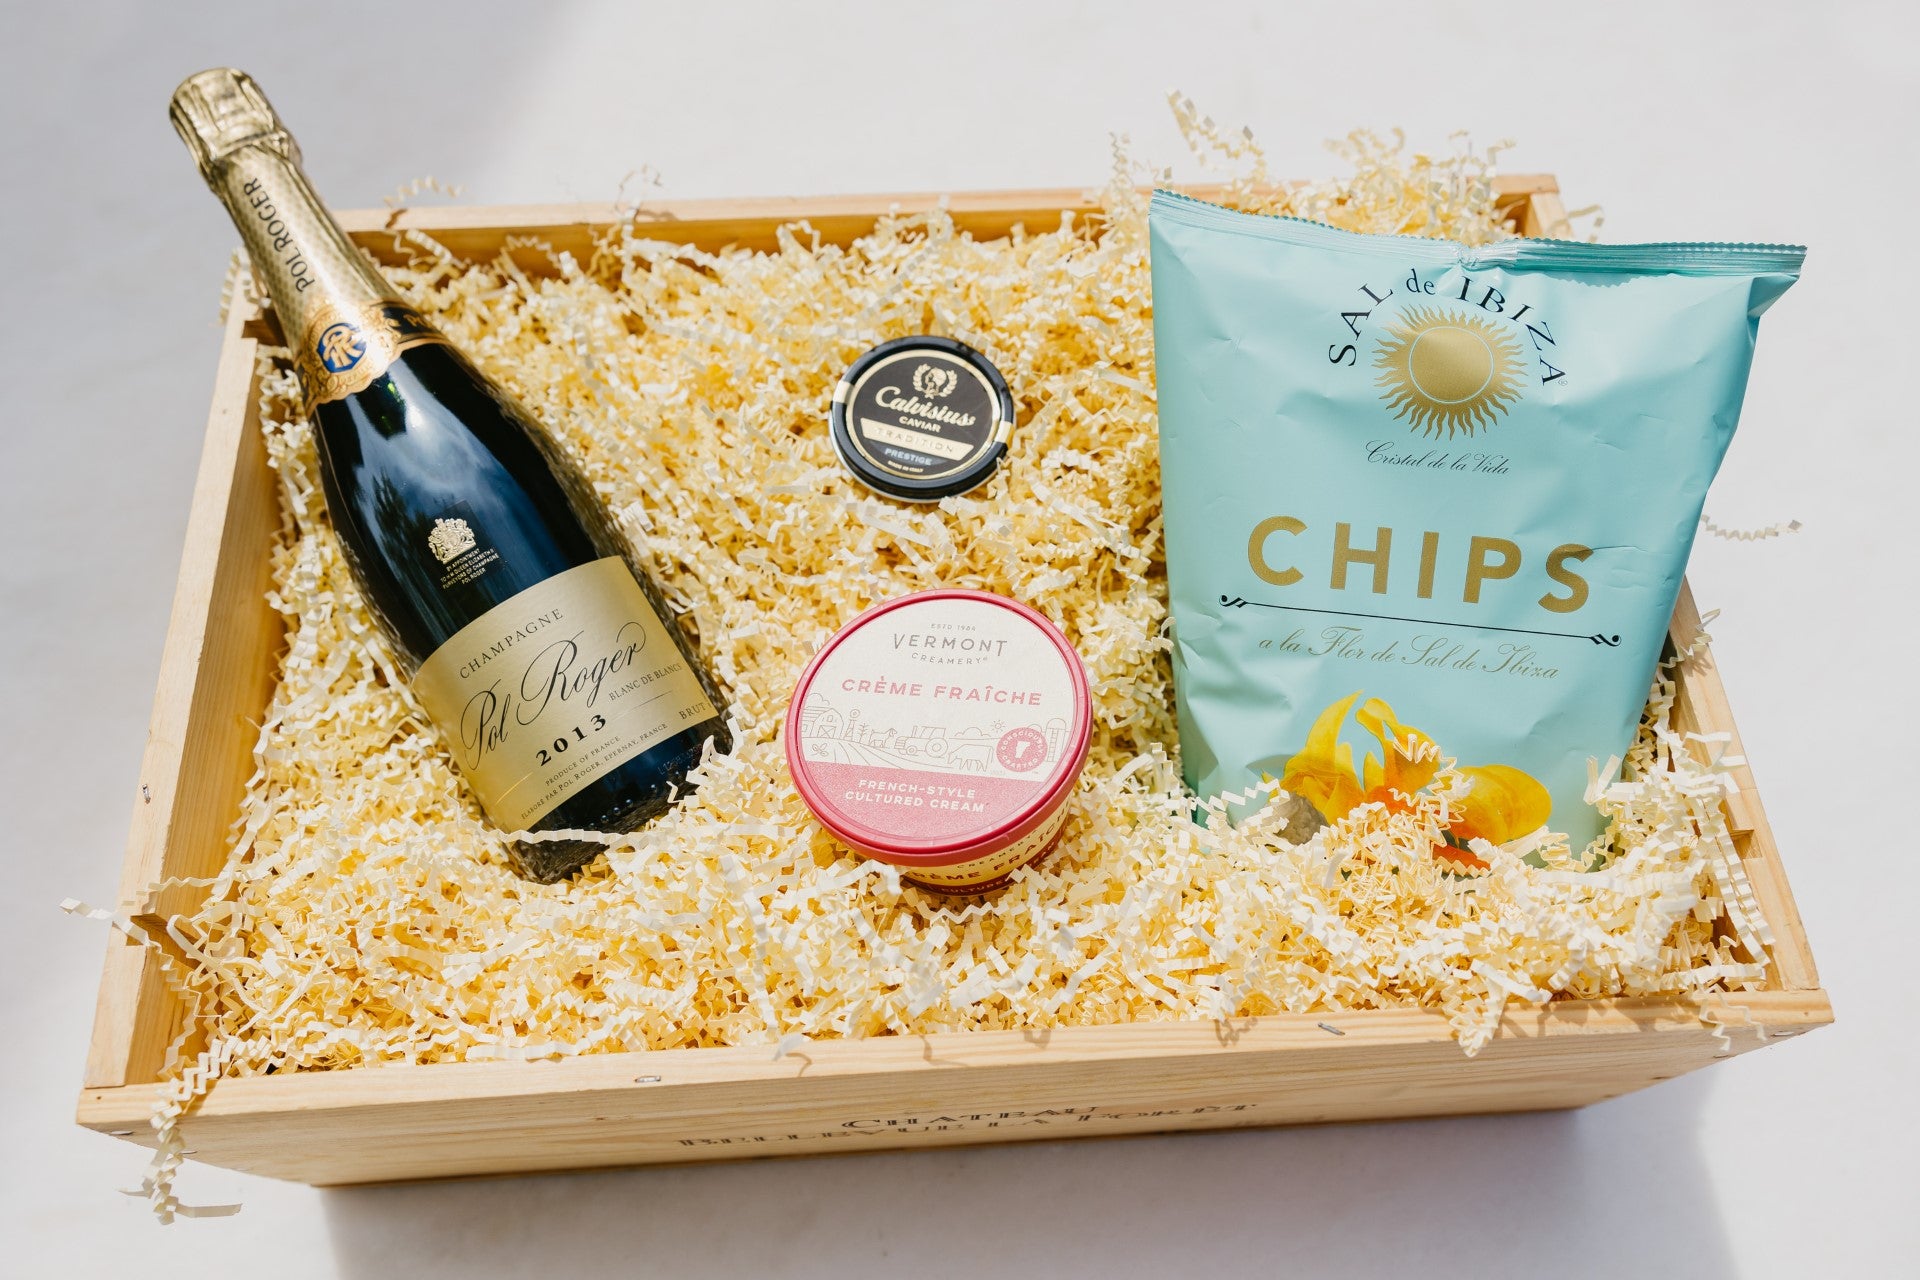 Champagne and caviar gift basket and set